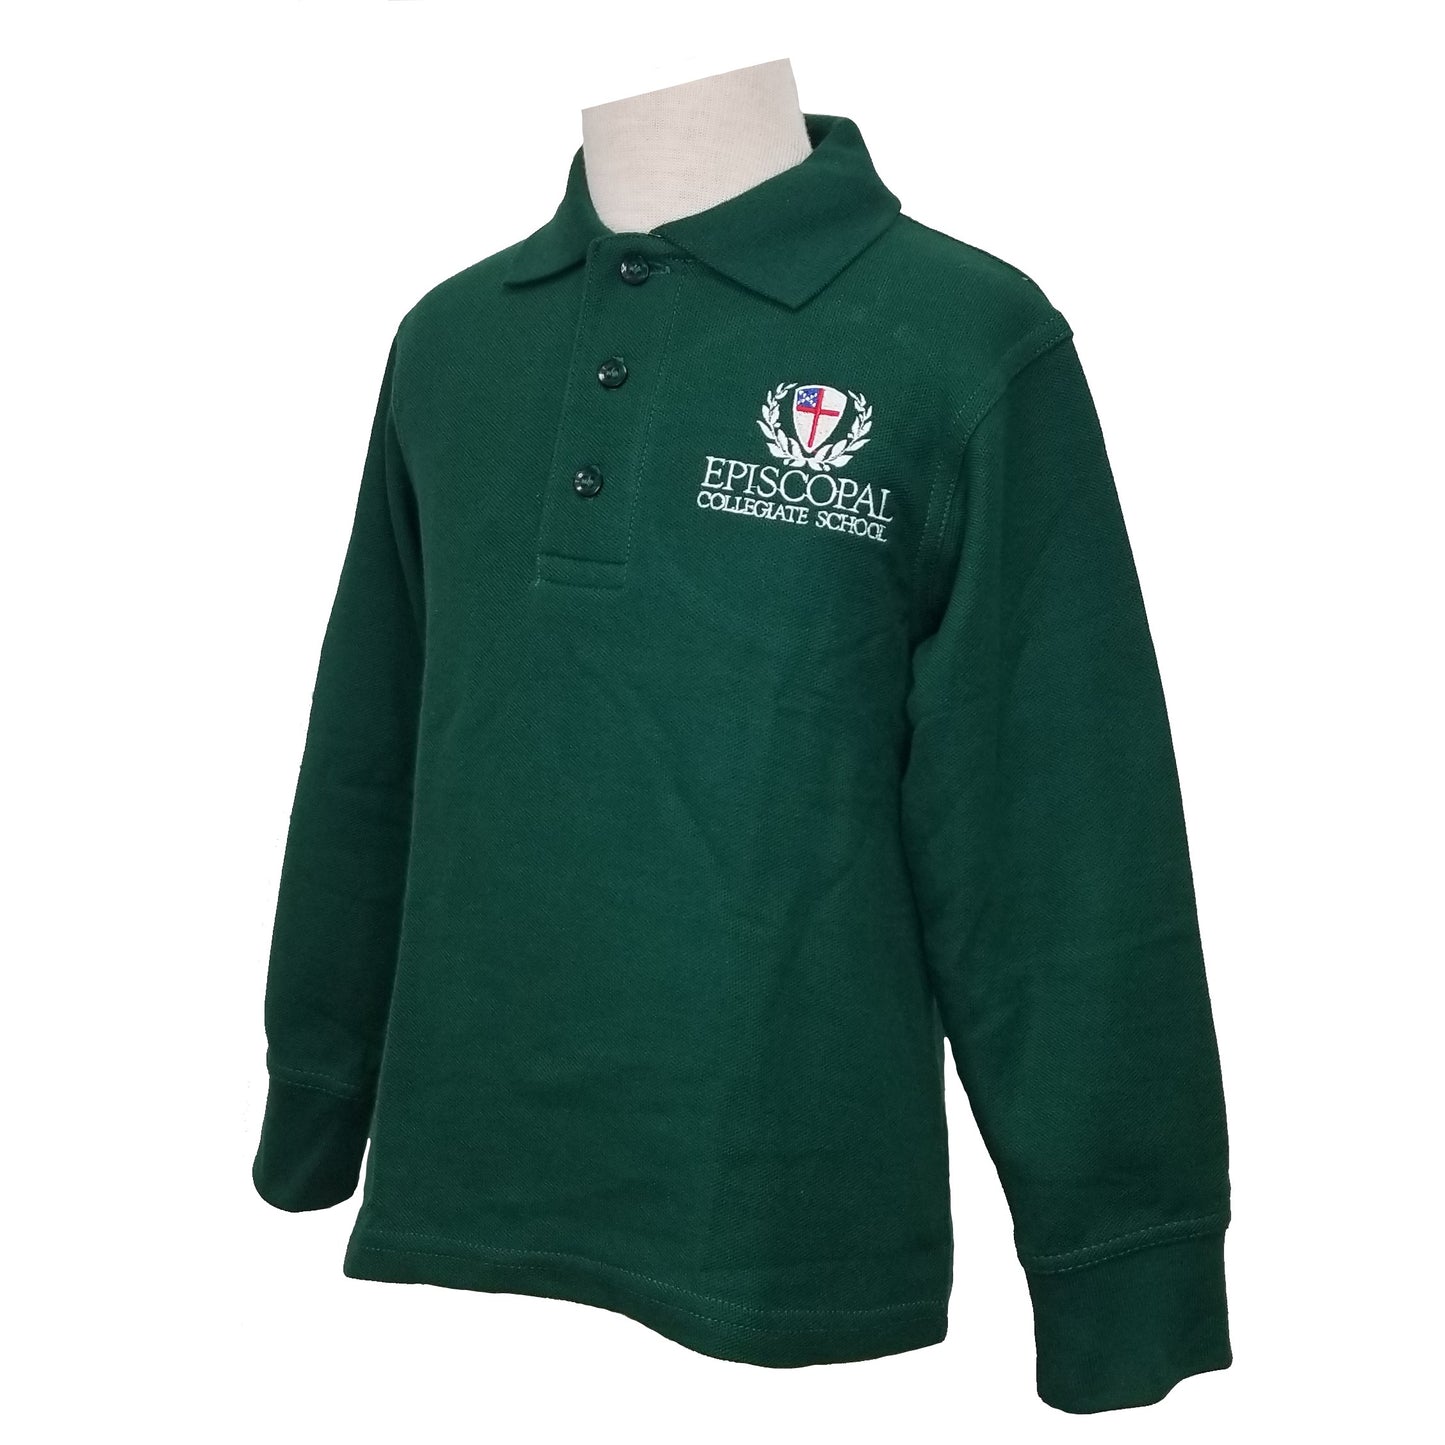 Youth Long Sleeve Polo With Episcopal Collegiate School Logo